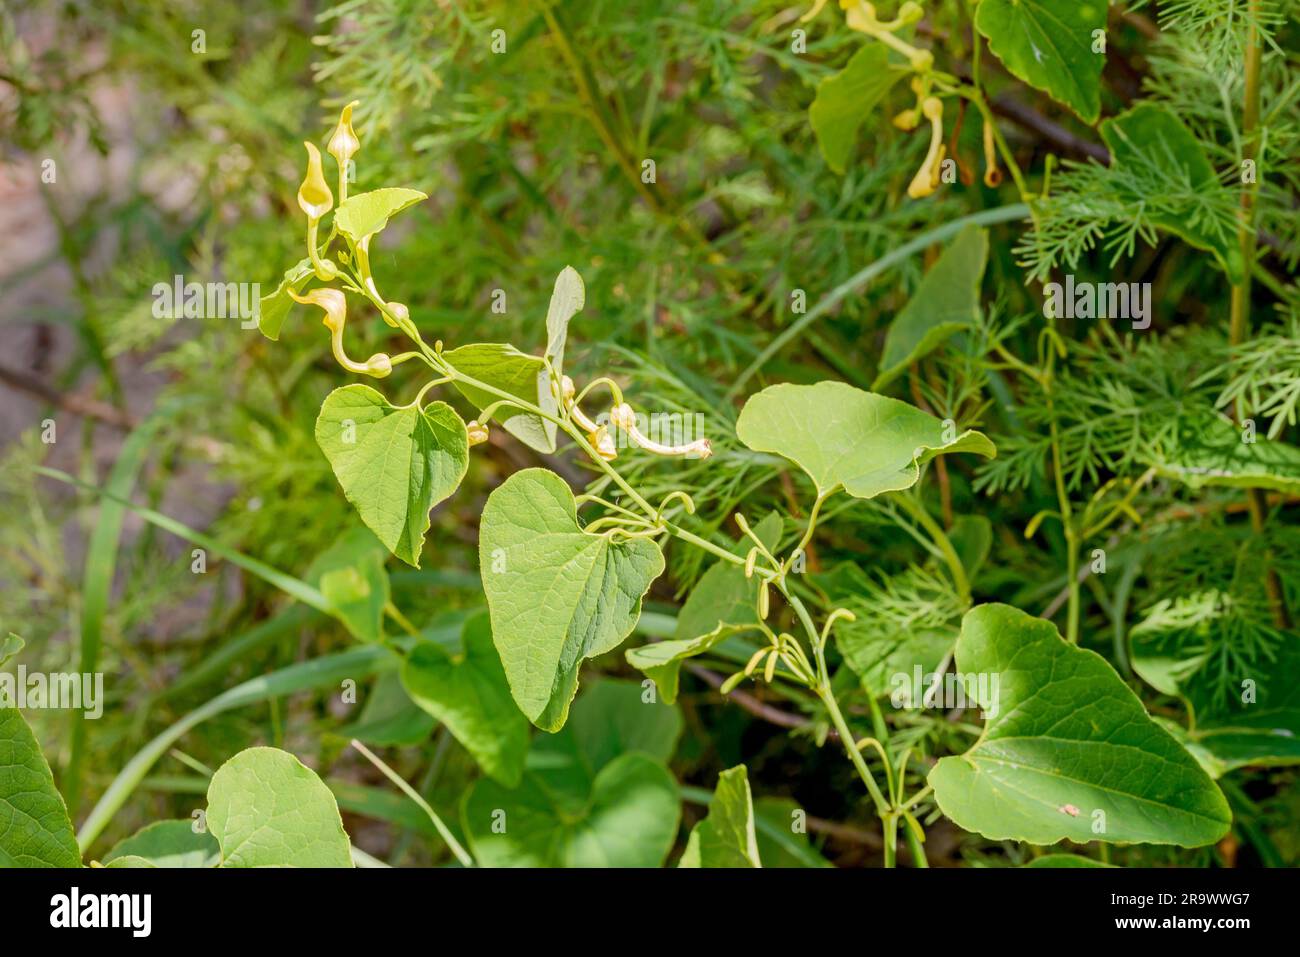 A Birthwort (Aristolochia clematitis) also called is growing in the sand under the warm summer sun Stock Photo